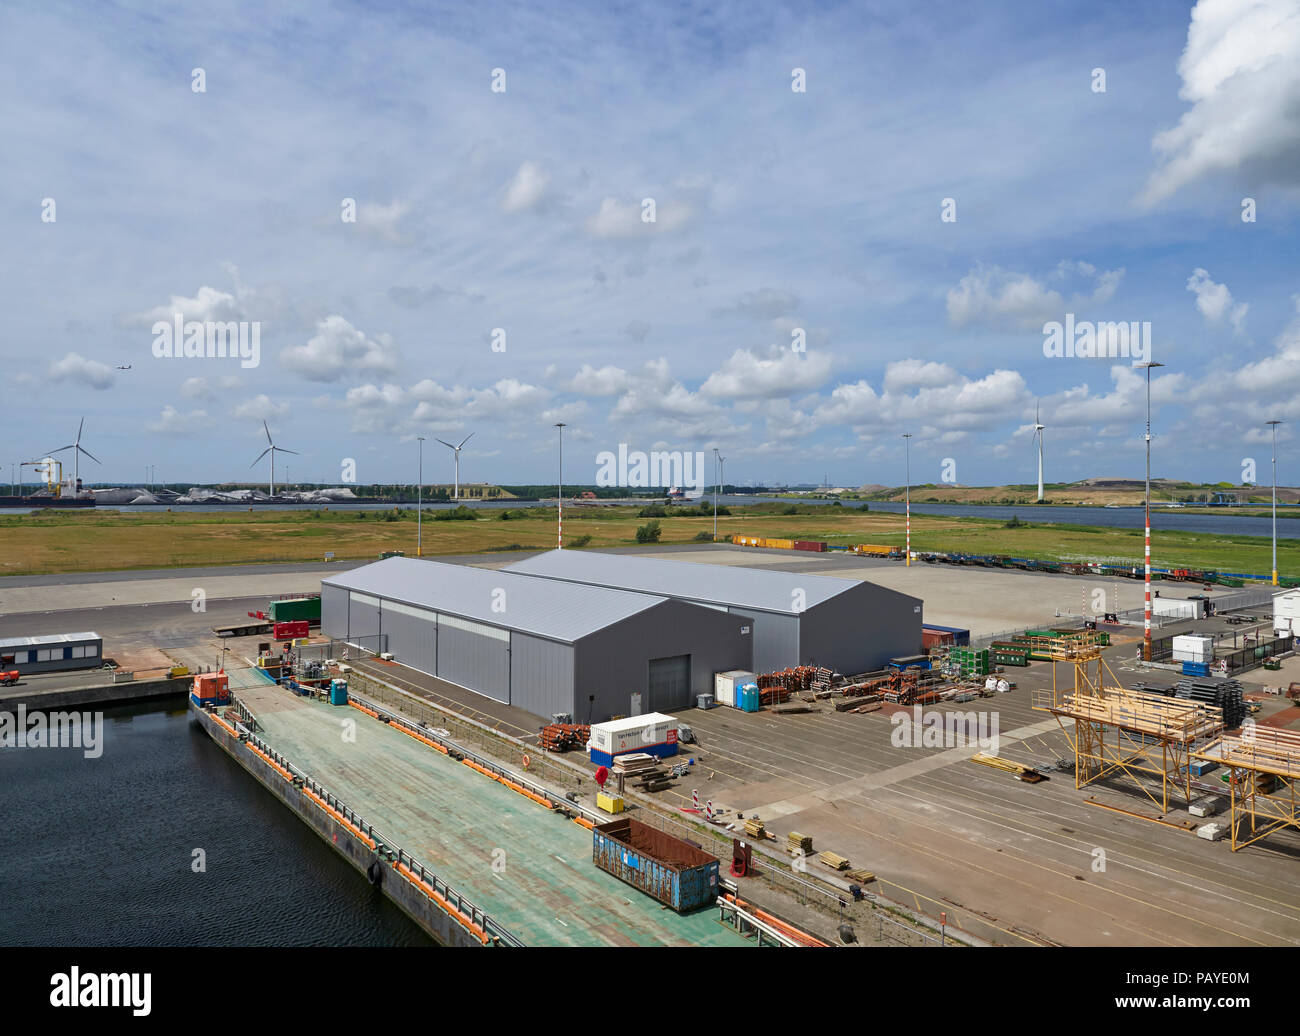 Another View across the Container Port in Den Haag in Amsterdam with Warehouses and Equipment lying on the Large Quay, Den Haag, Holland. Stock Photo